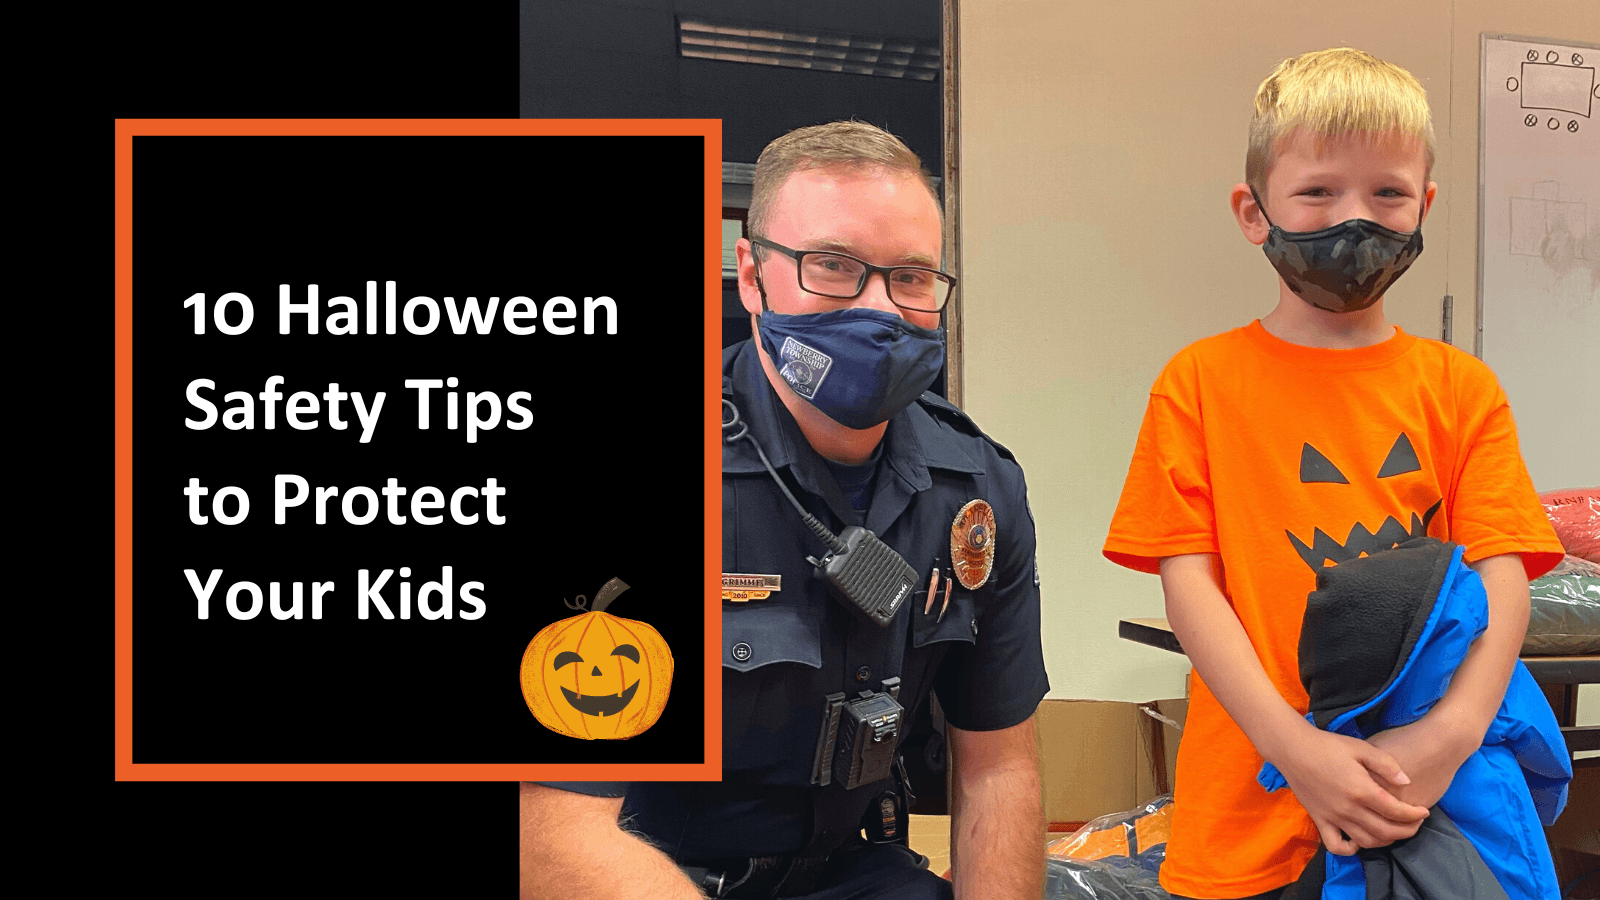 10 Halloween Safety Tips to Protect Your Kids